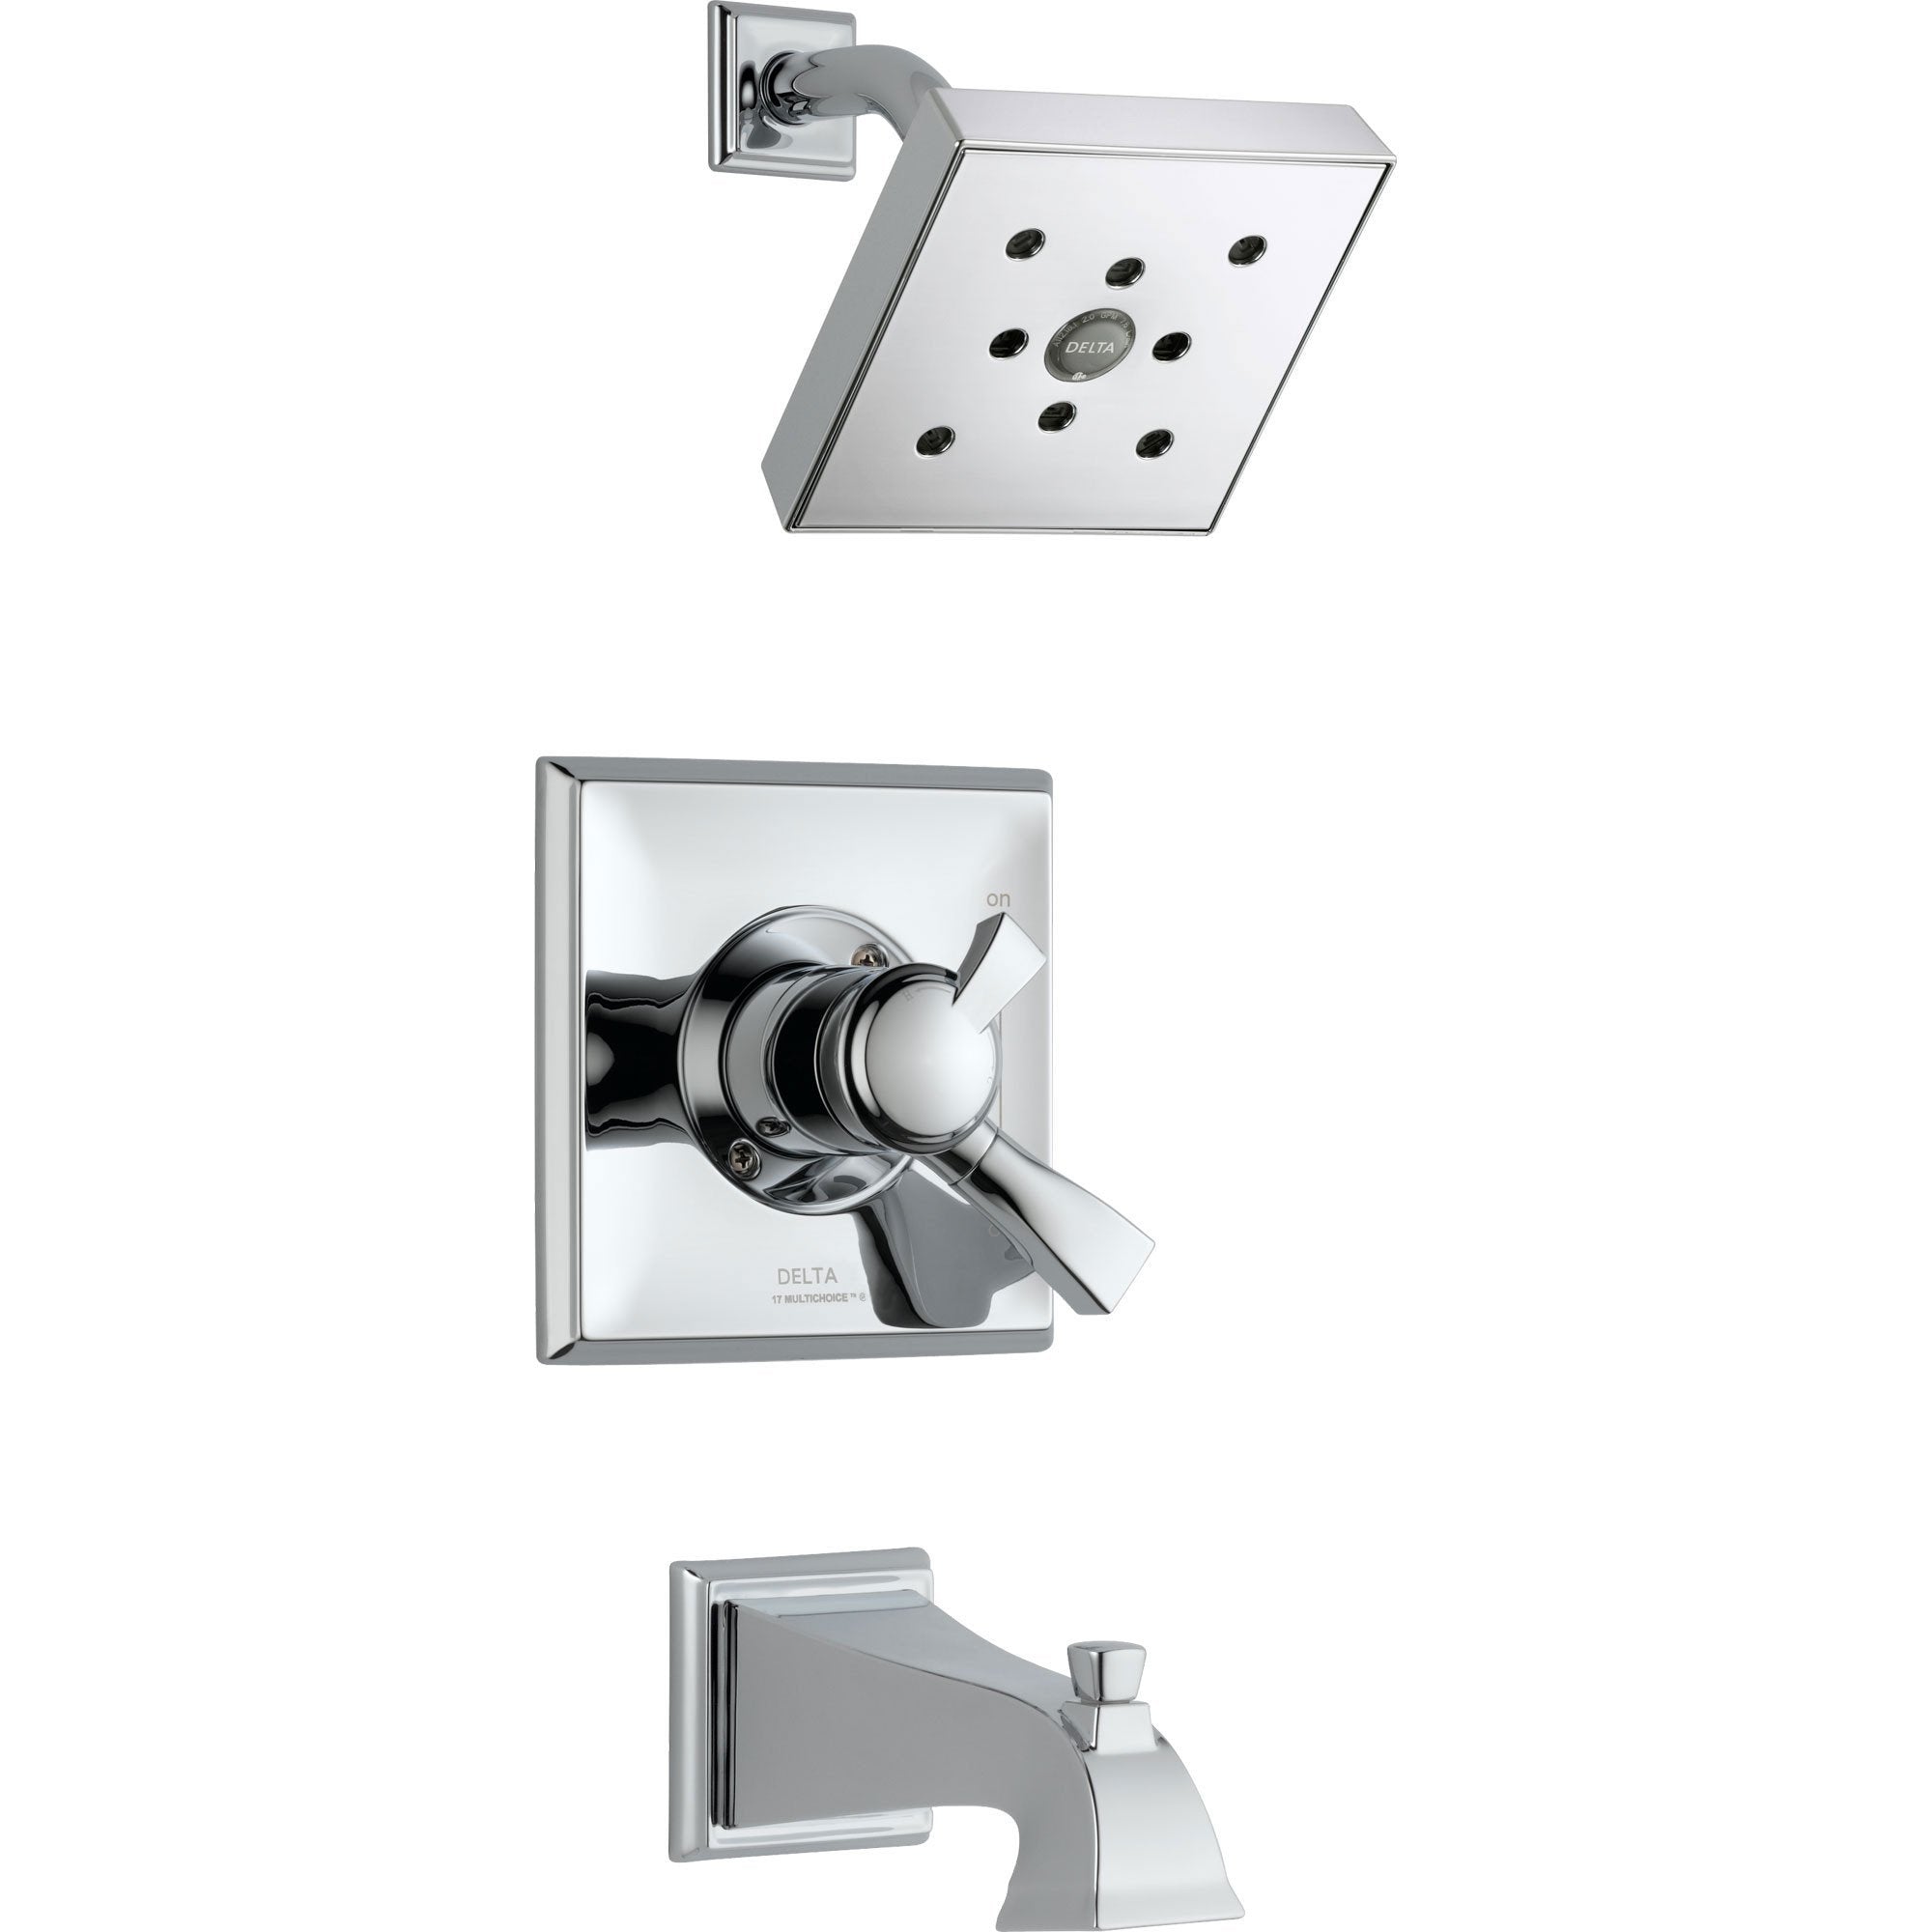 Delta Dryden Temperature/Volume Chrome Tub and Shower Faucet with Valve D373V